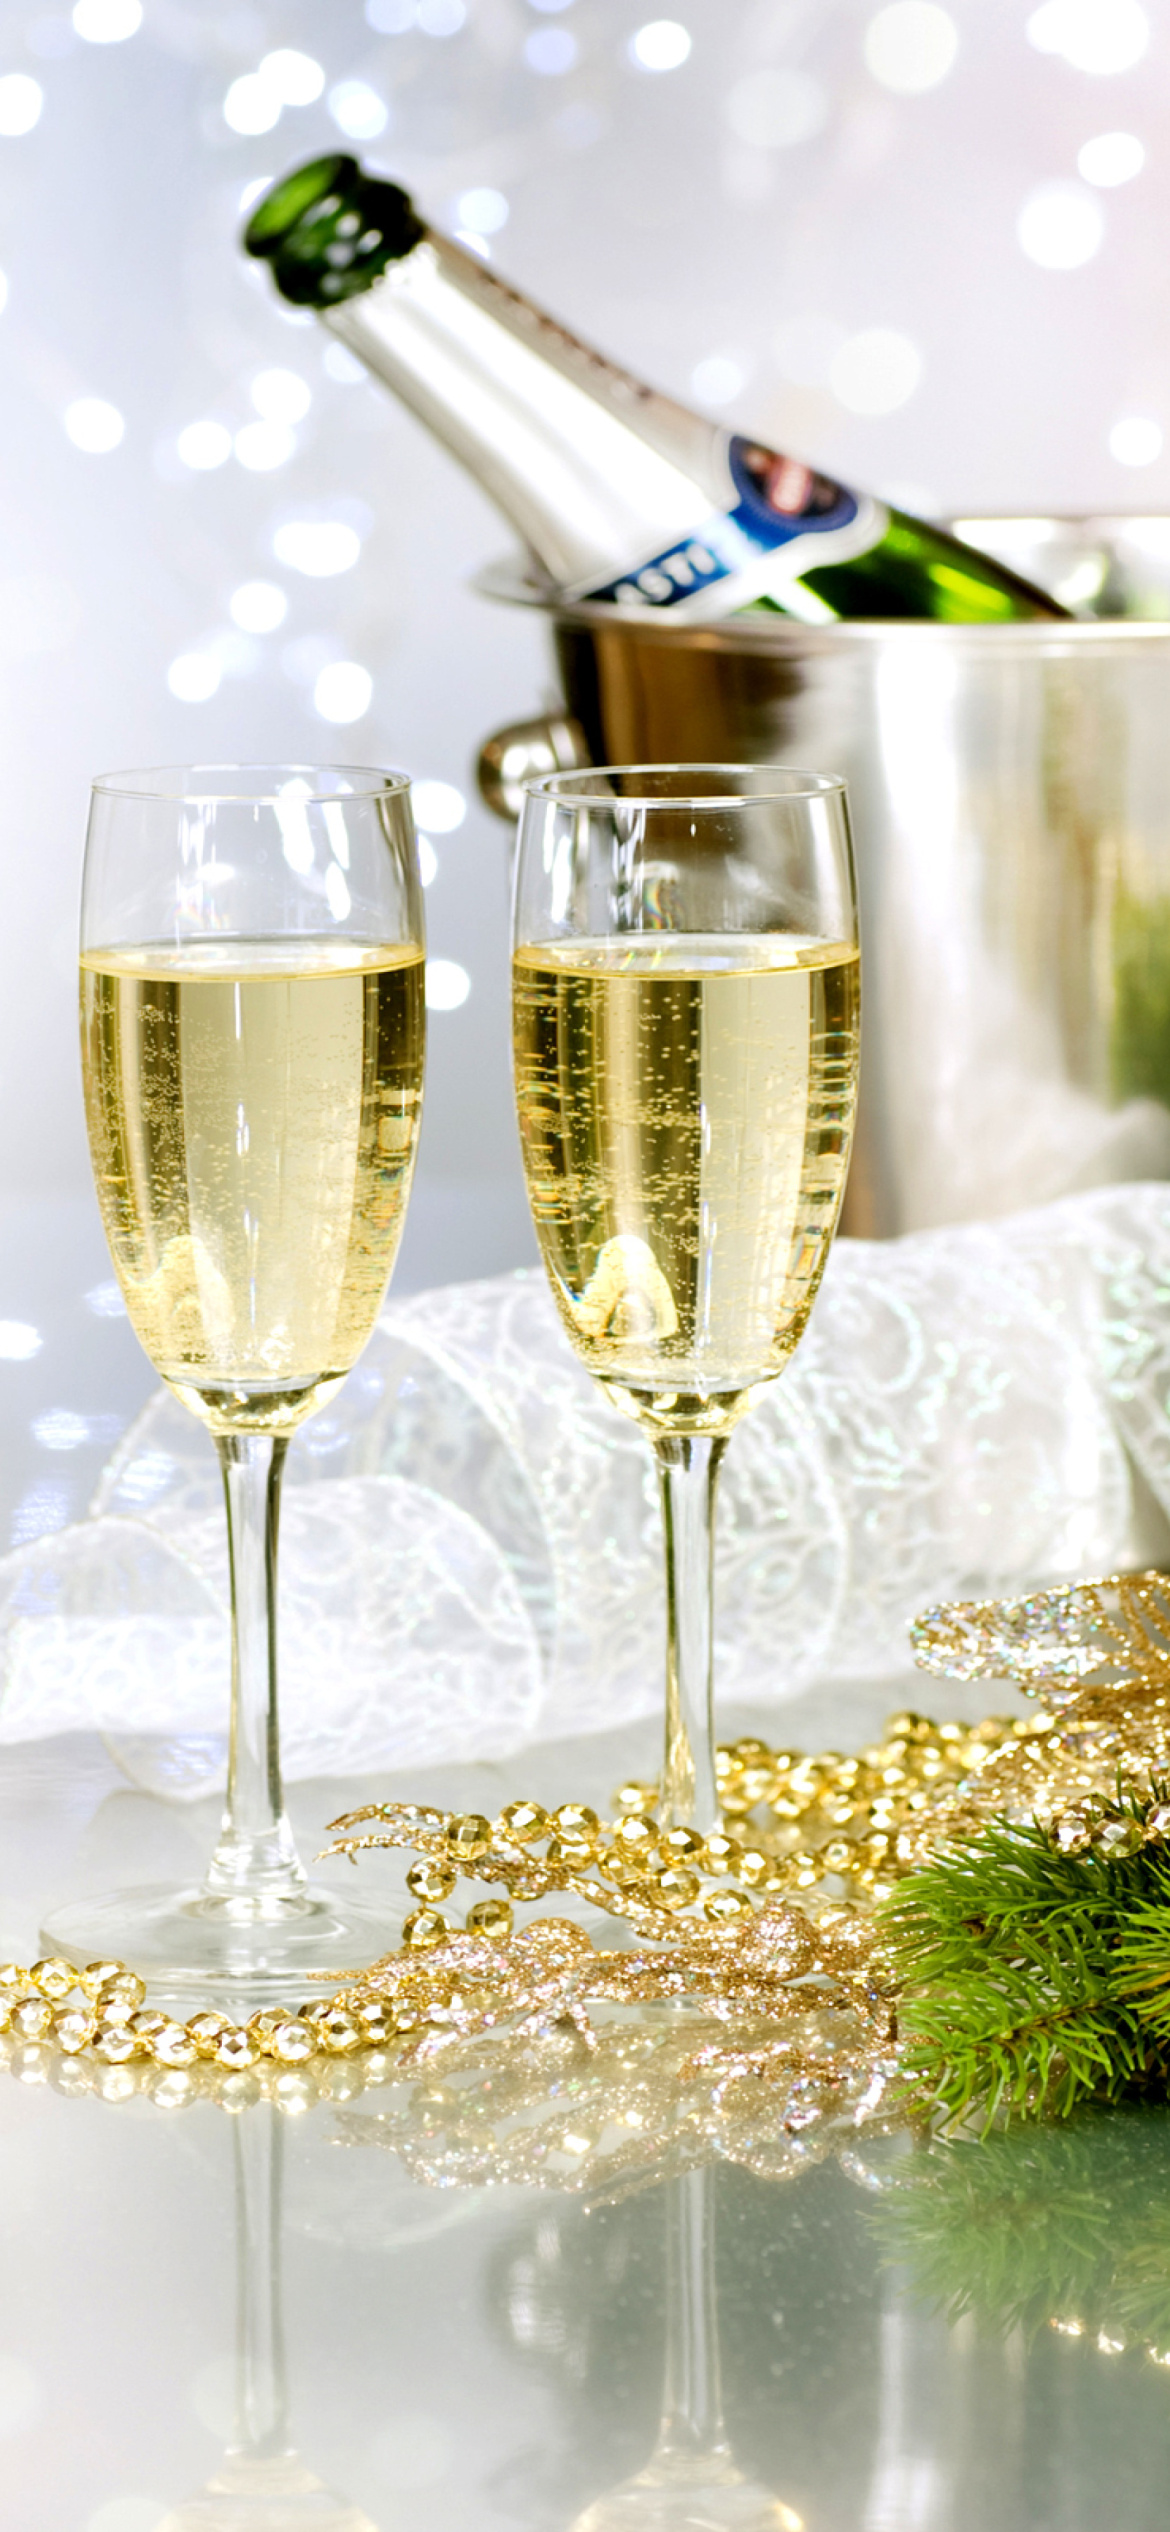 Das Champagne To Celebrate The New Year Wallpaper 1170x2532